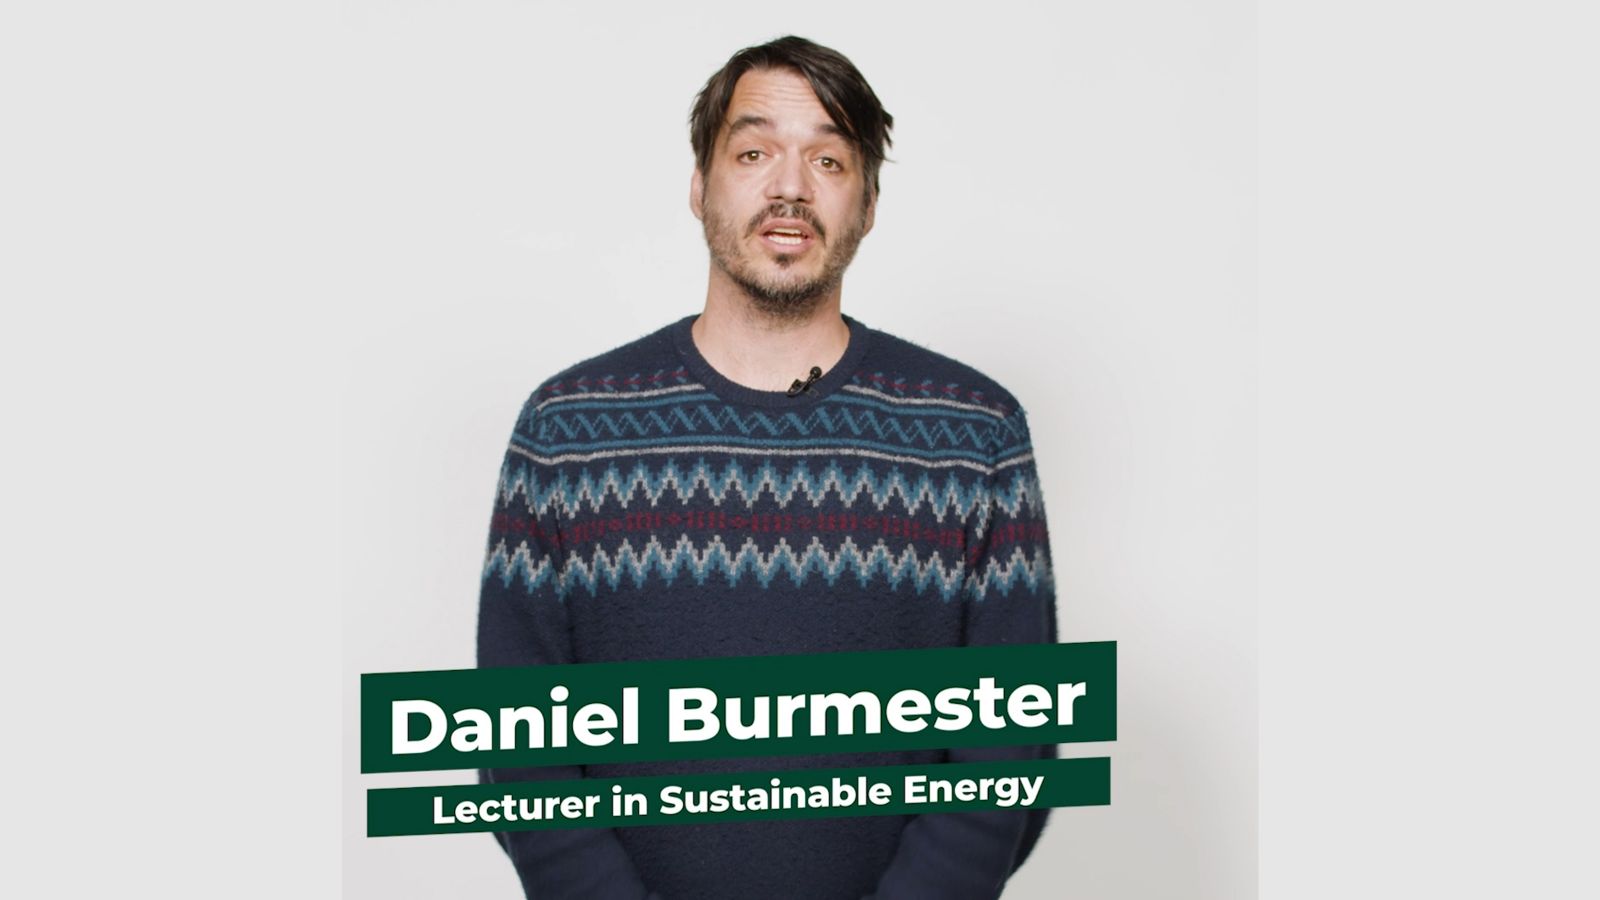 Lecturer Danical Burmester stands facing the camera against a white background